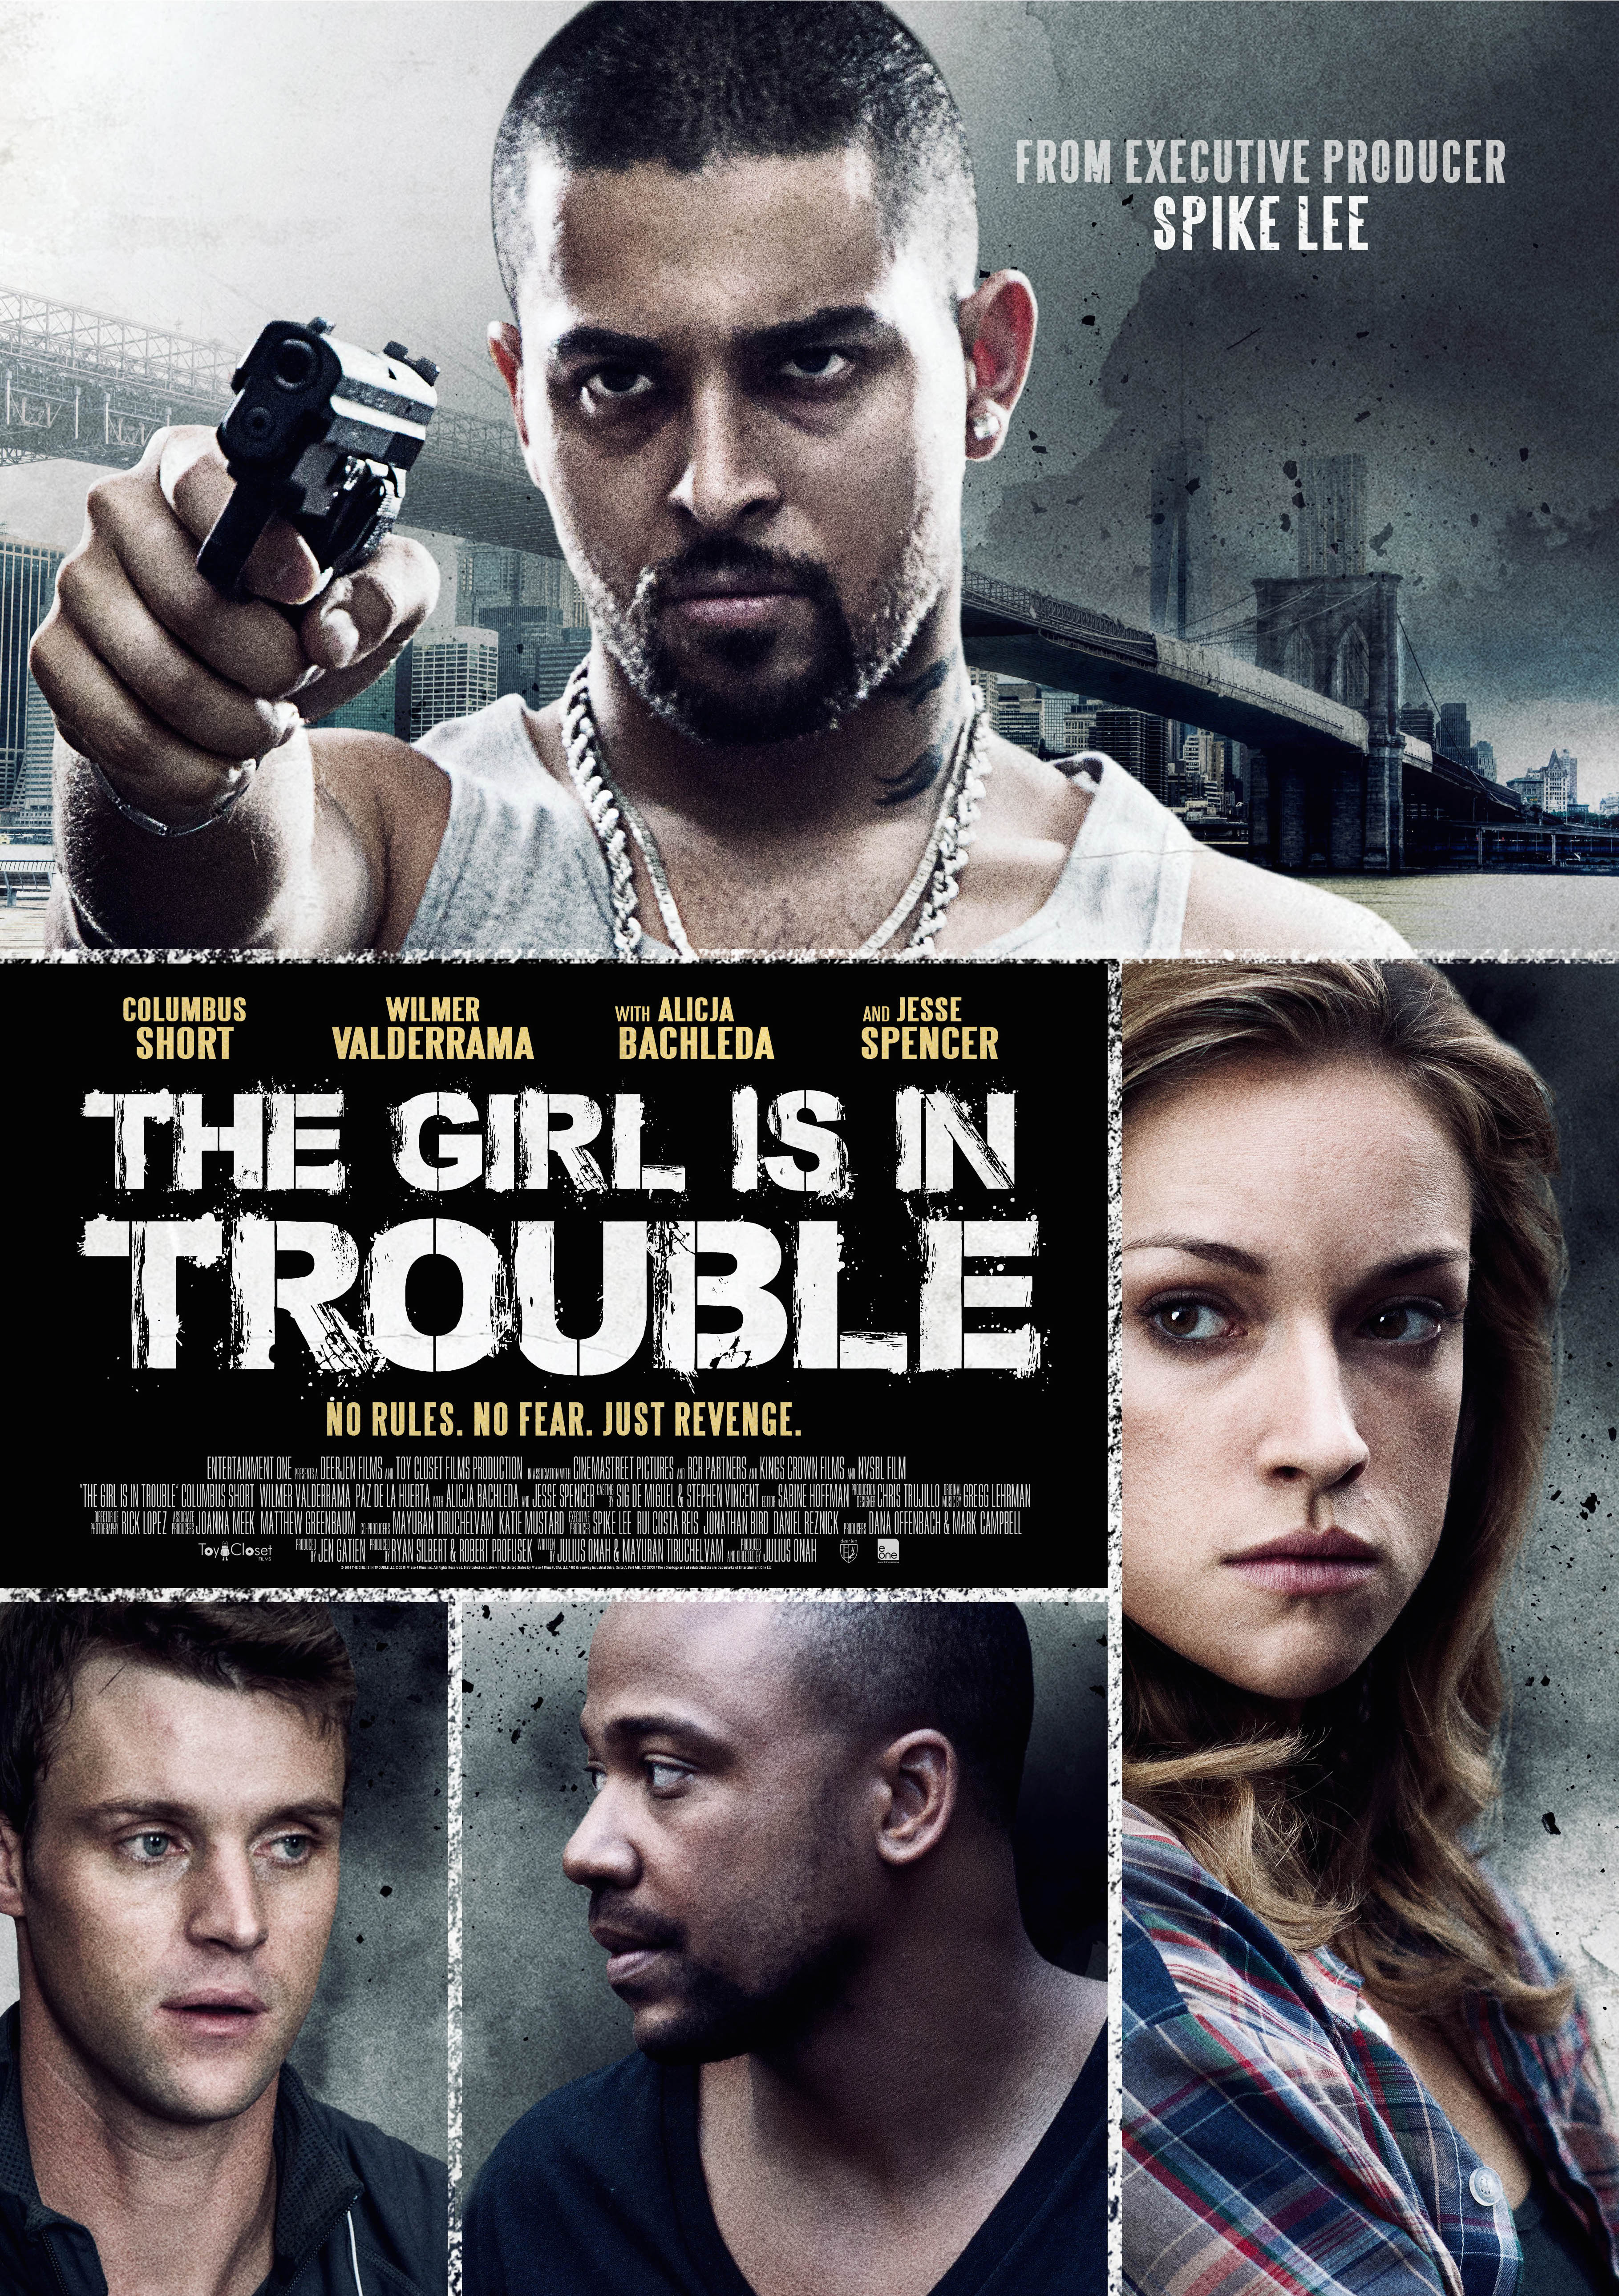 Wilmer Valderrama, Alicja Bachleda, Jesse Spencer and Columbus Short in The Girl Is in Trouble (2015)